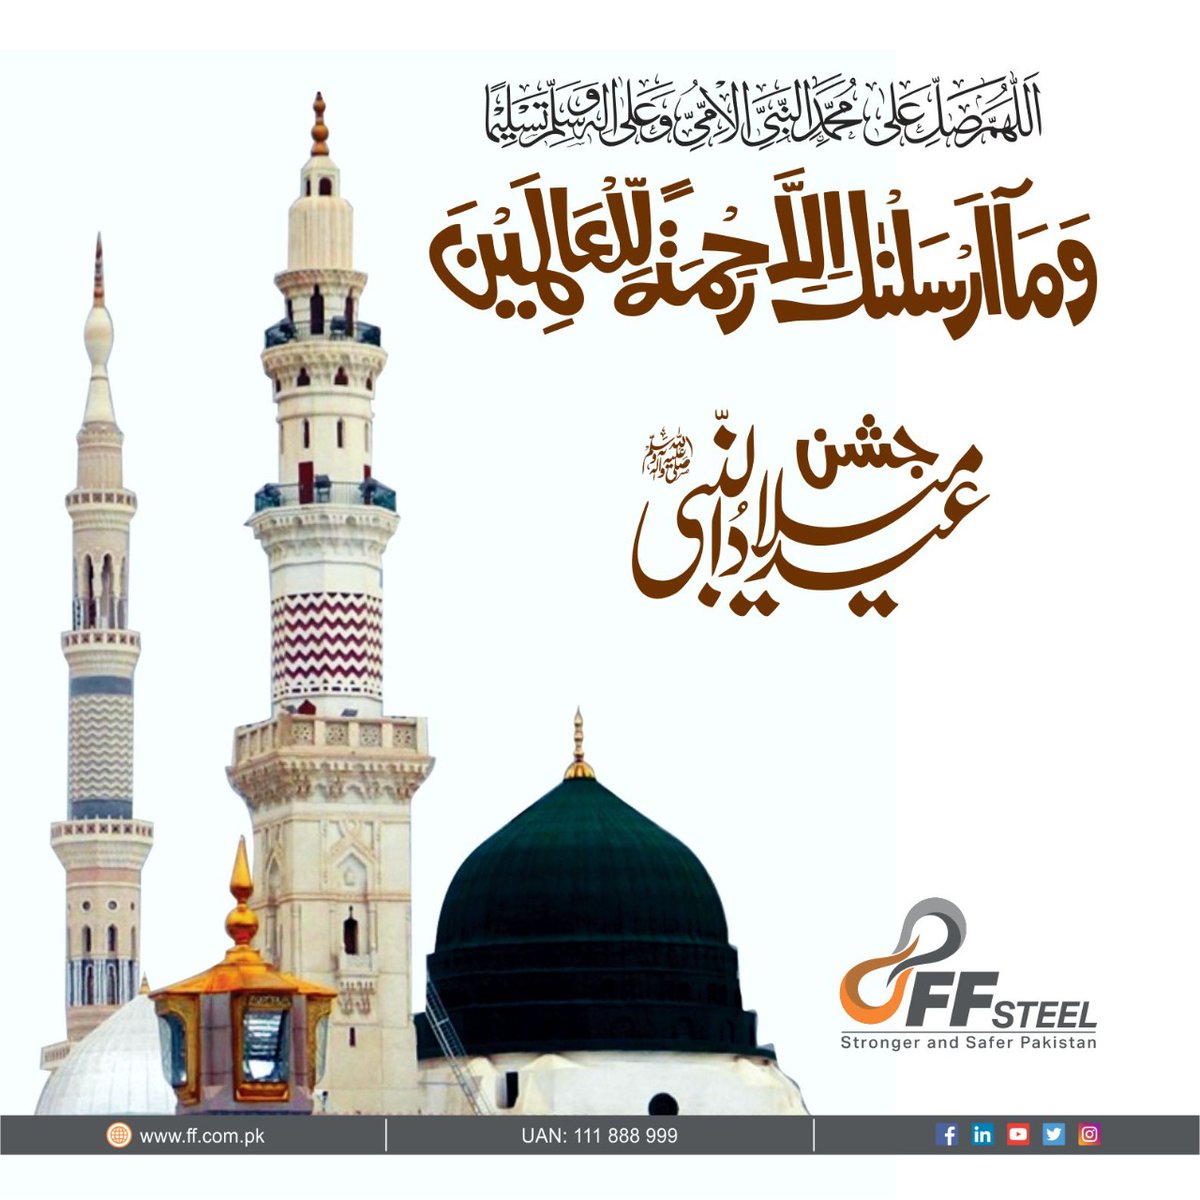 Eid-ul-Milad-un-Nabi (SAW) provides us an opportunity to pray and seek forgiveness and blessings from the Almighty for the entire mankind.
FF Steel extends greetings to all Muslims on this auspicious occasion. 
#EidMiladUnNabi #FFSteel #StrongerAndSafer #Pakistan